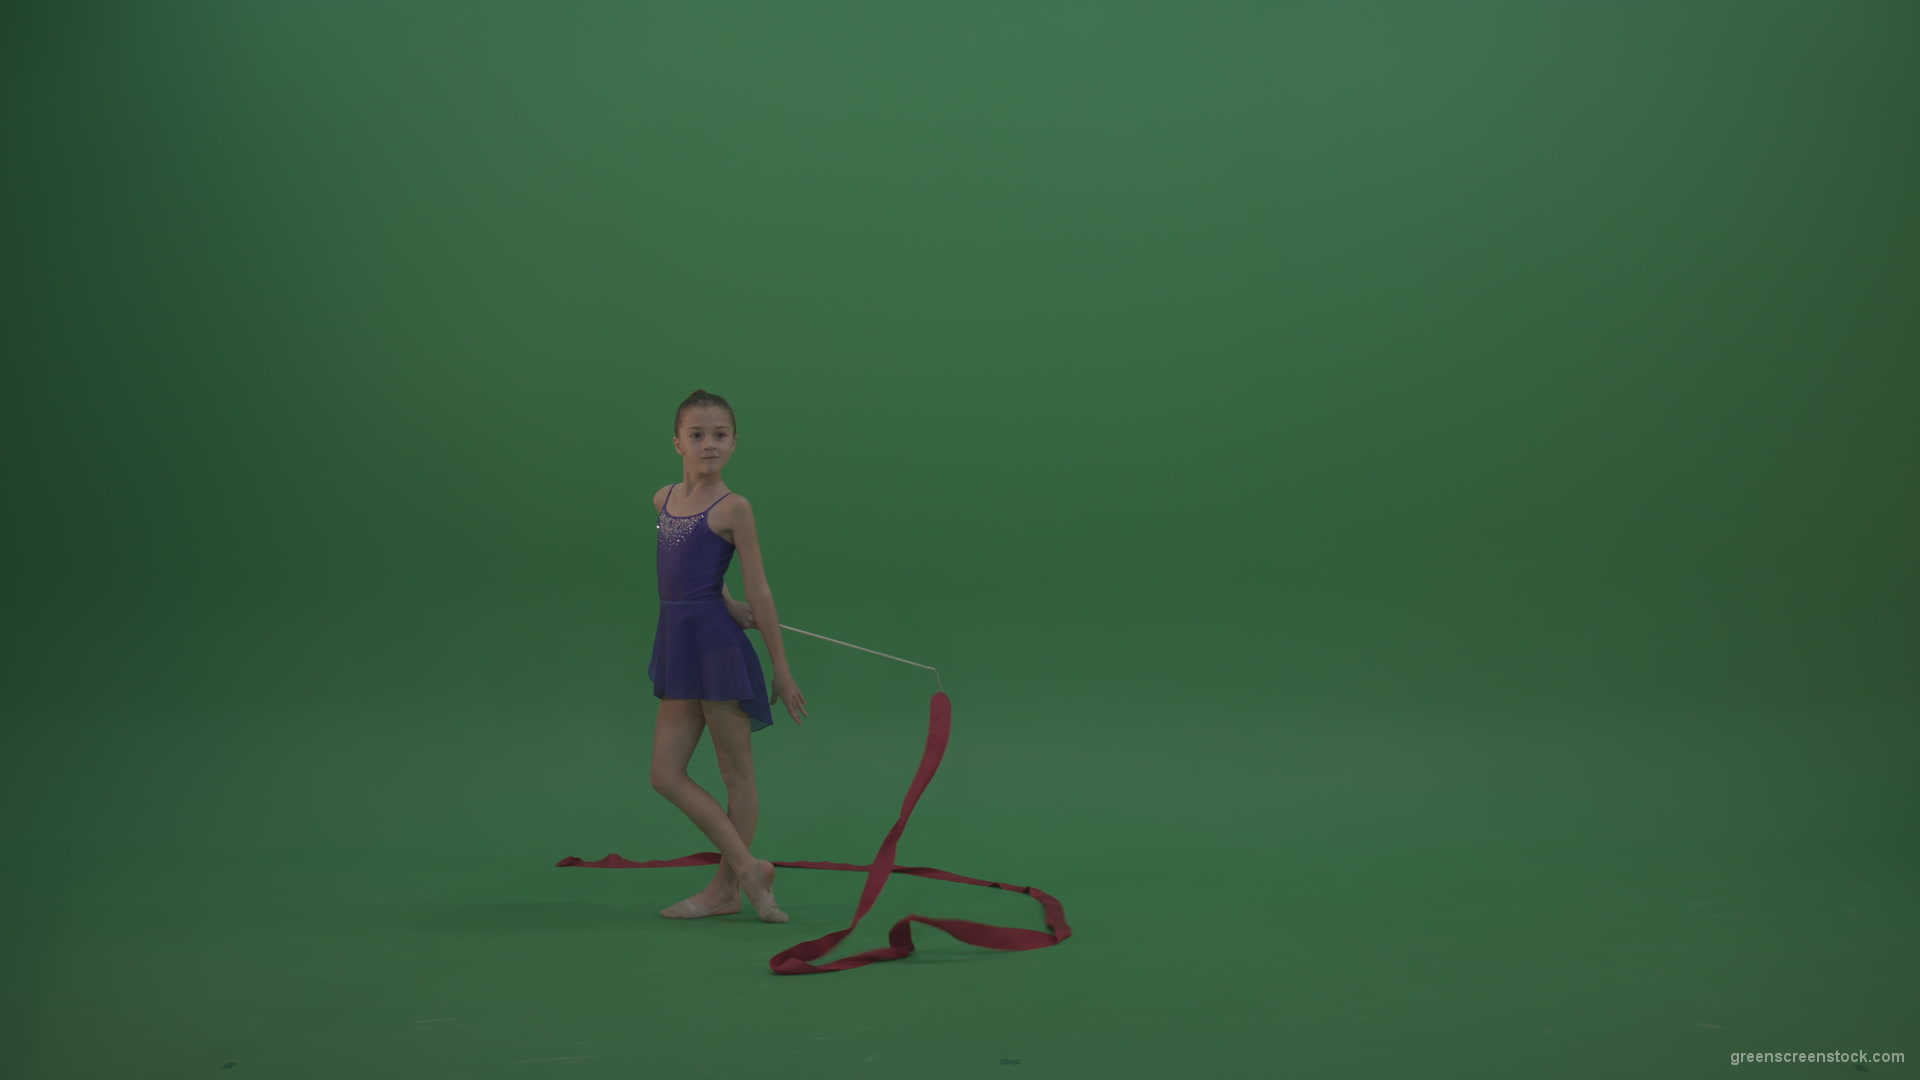 Young_Female_Acrobat_Gymnast_Performing_Acro_Dance_Using_Red_Long_Ribbon_On_Green_Screen_Wall_Chroma_Key_Background_009 Green Screen Stock